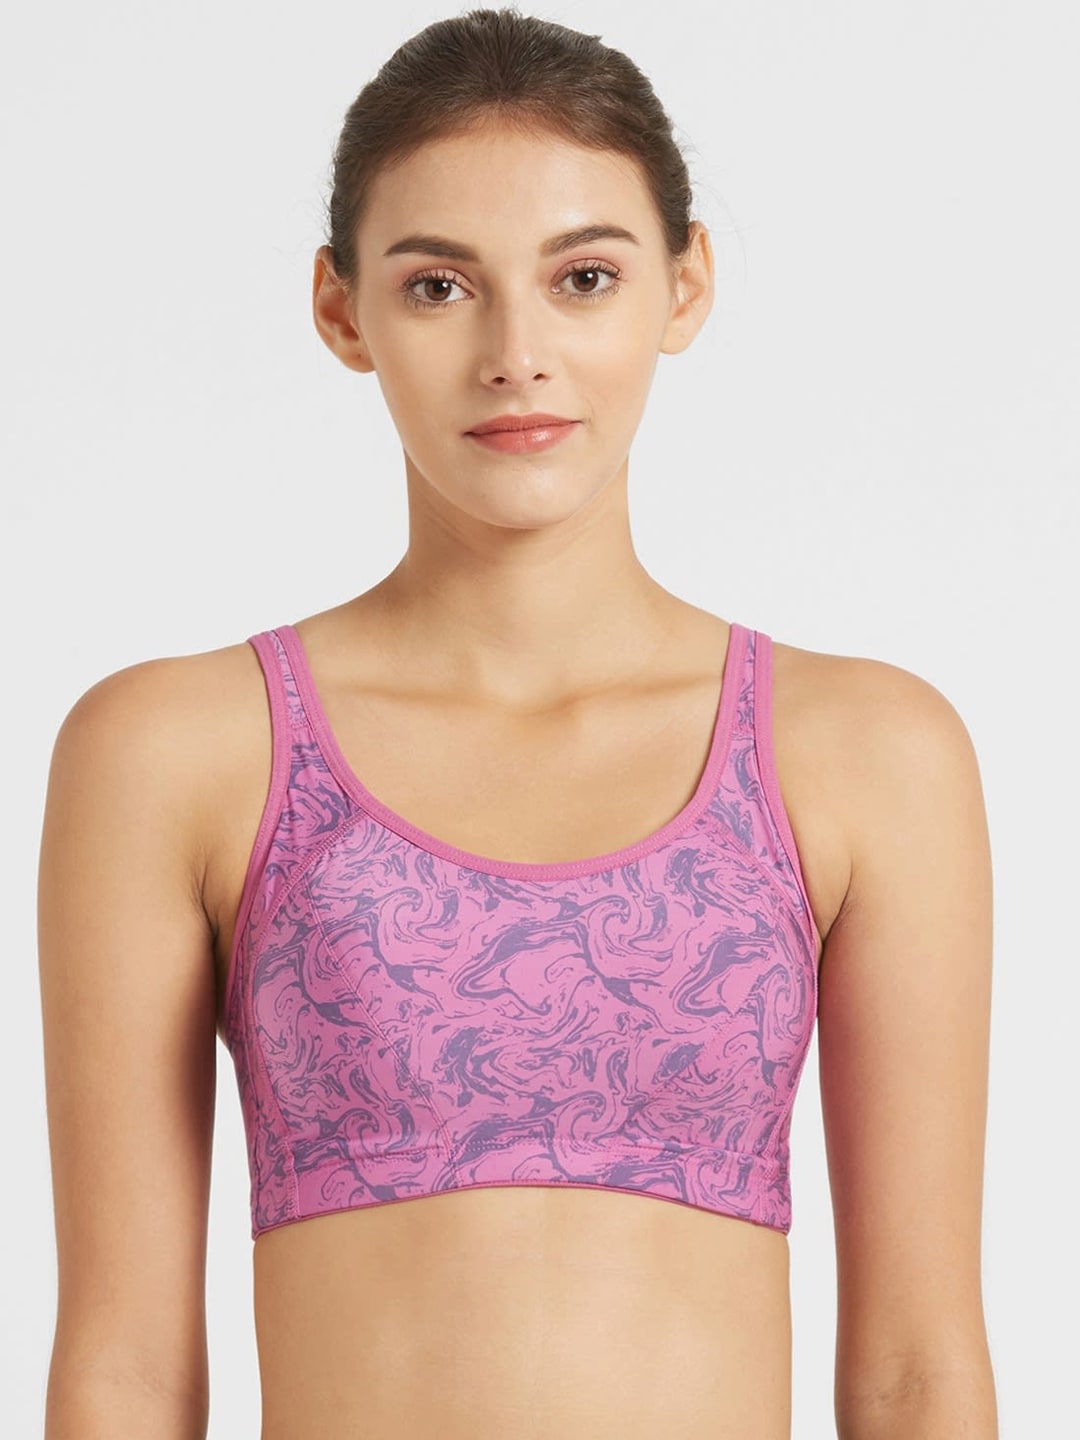 Jockey Pink & Blue Printed Non-Wired Lightly Padded Medium Support Sports Bra MI01-0103 Price in India